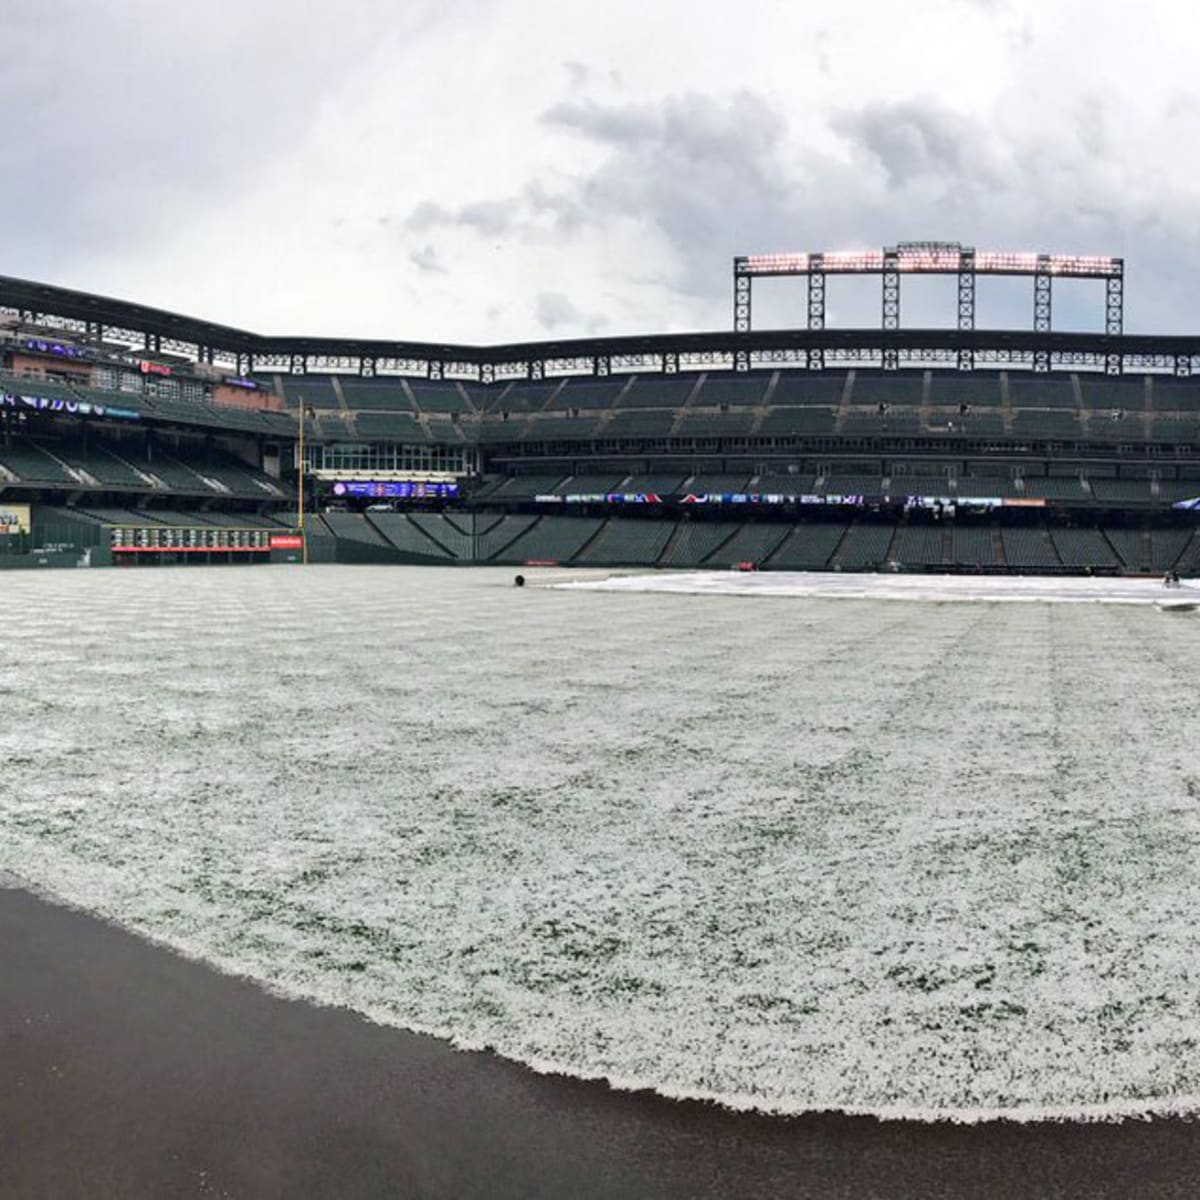 Crazy hail drops at Coors Field in Denver 